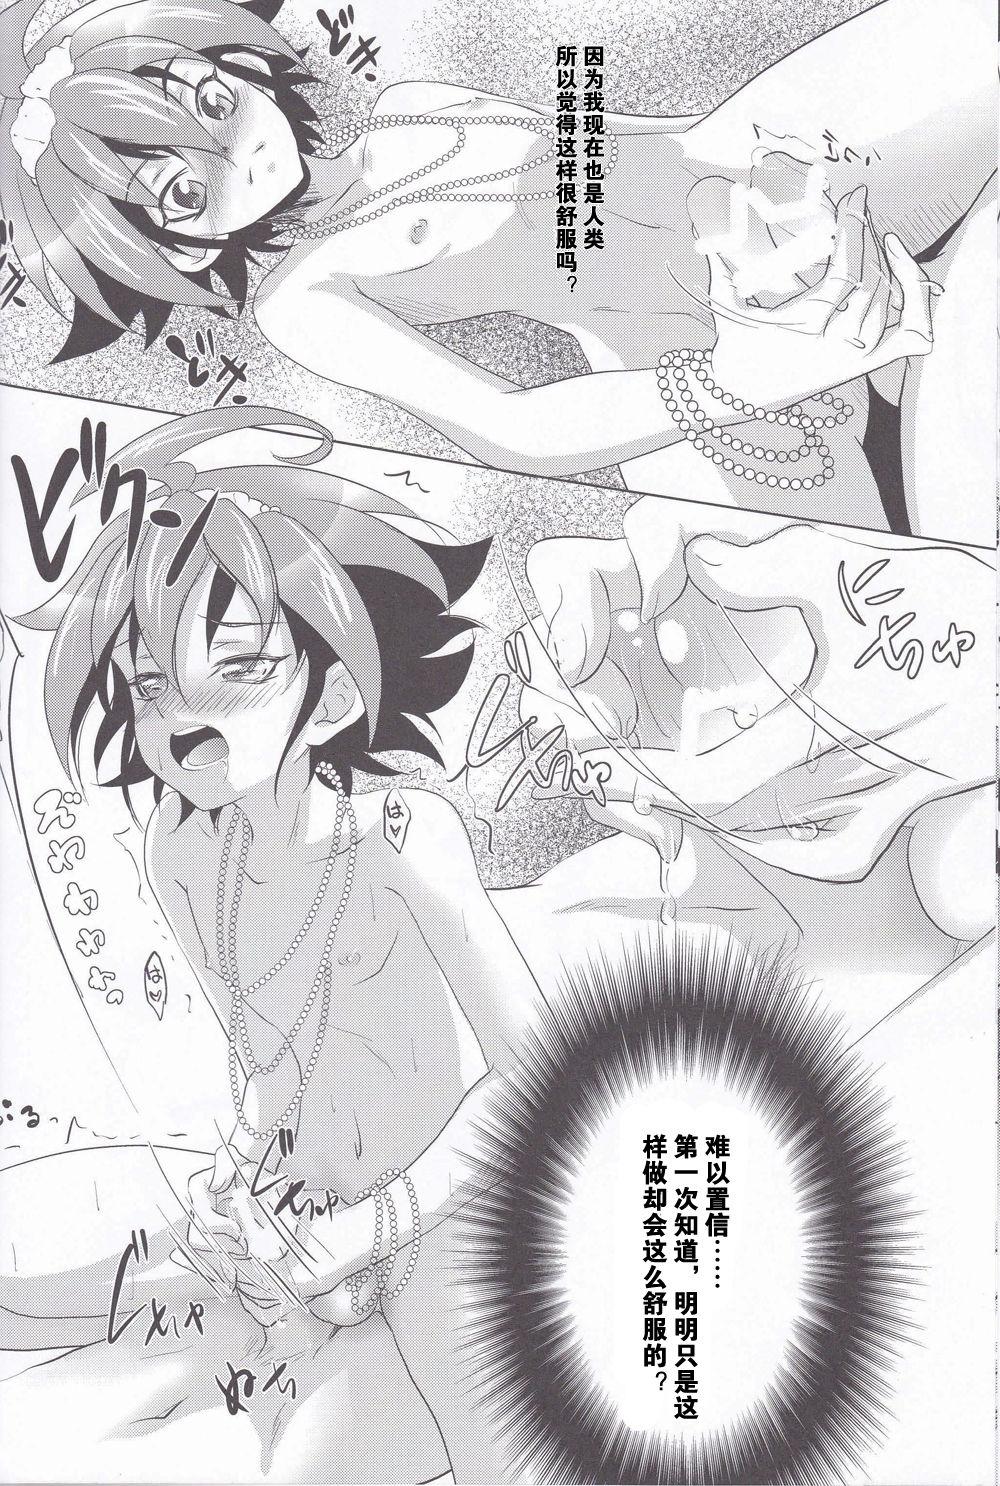 Pussy To Mouth Mermaid Memory - Yu-gi-oh arc-v Blackmail - Page 9